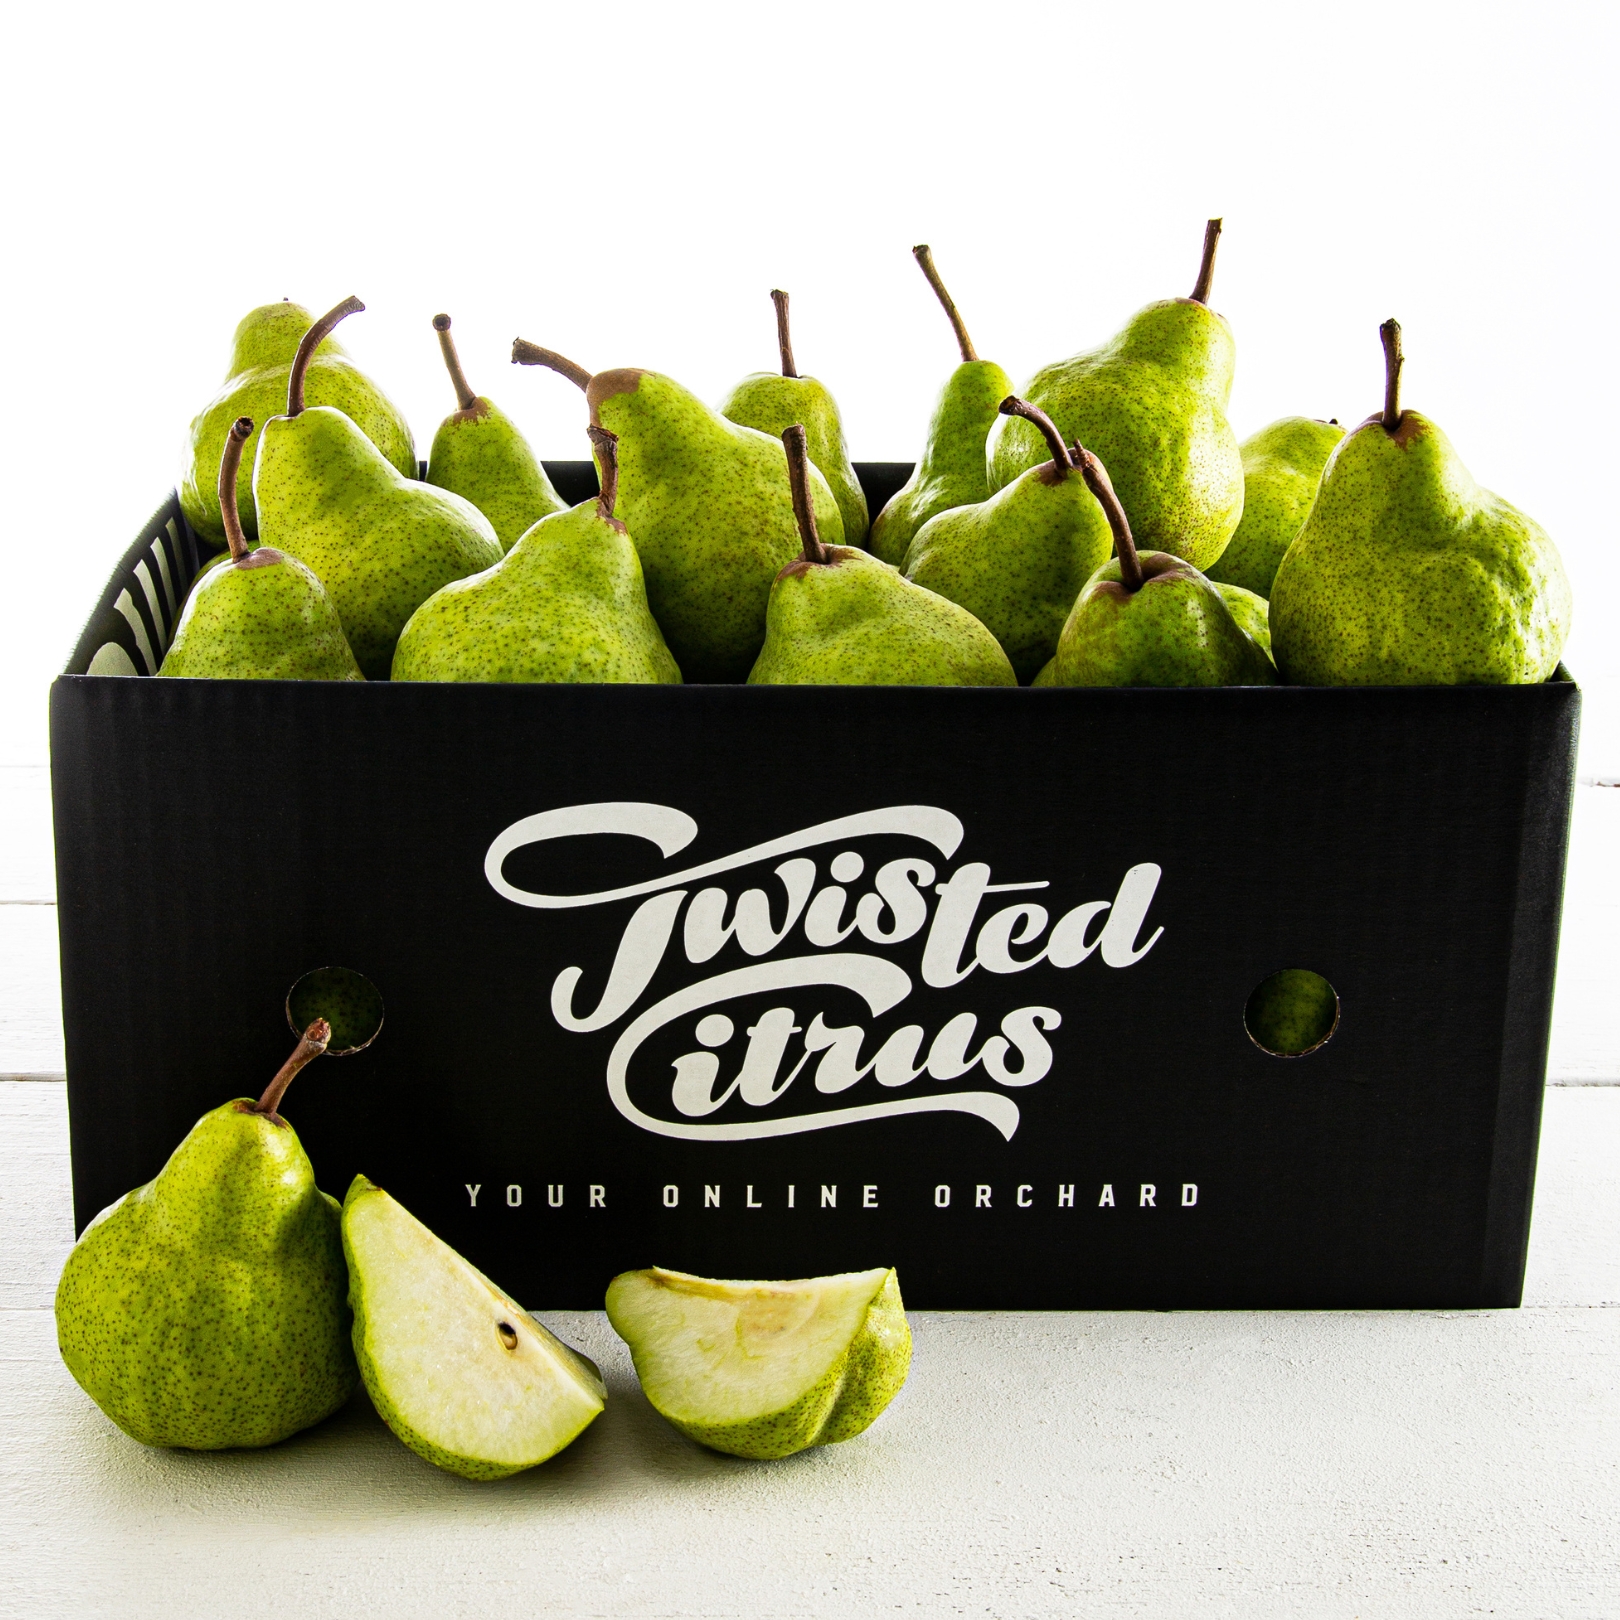 Pears - Williams Bon Chretien fruit box delivery nz